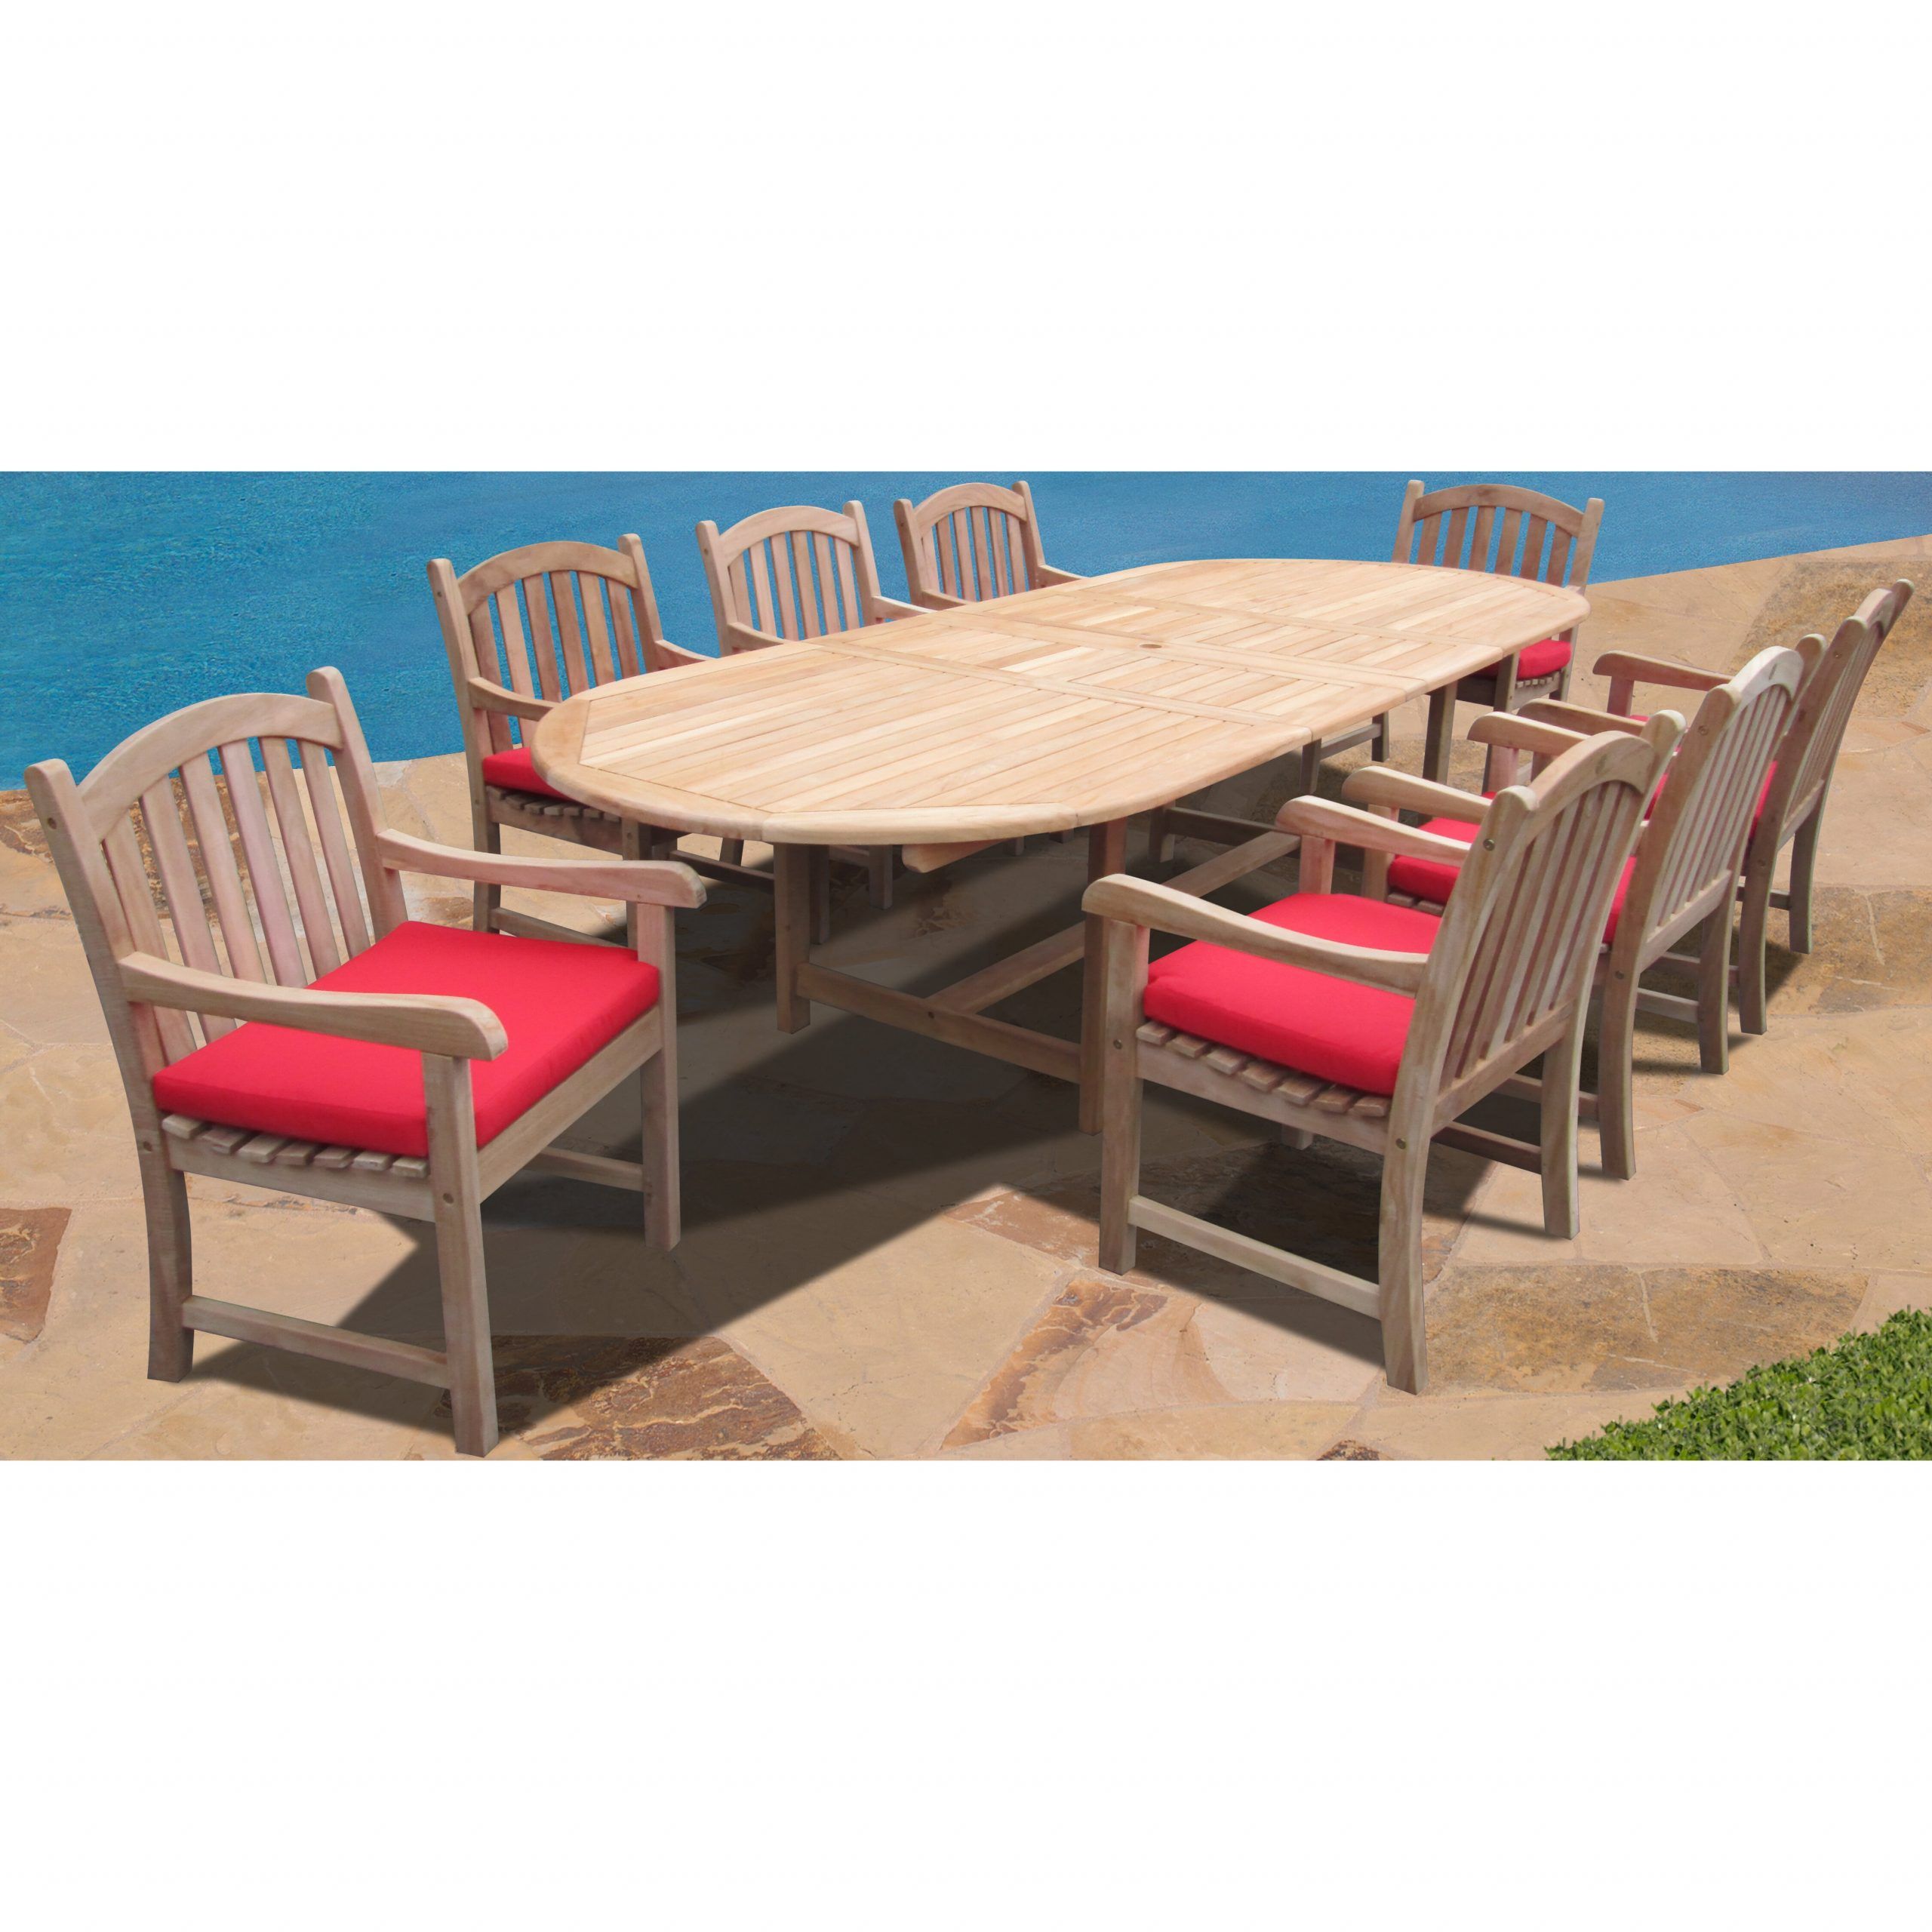 Forever Patio Verano 9 Piece Dining Set With Cushions & Reviews | Wayfair Pertaining To 9 Piece Extendable Patio Dining Sets (View 13 of 15)